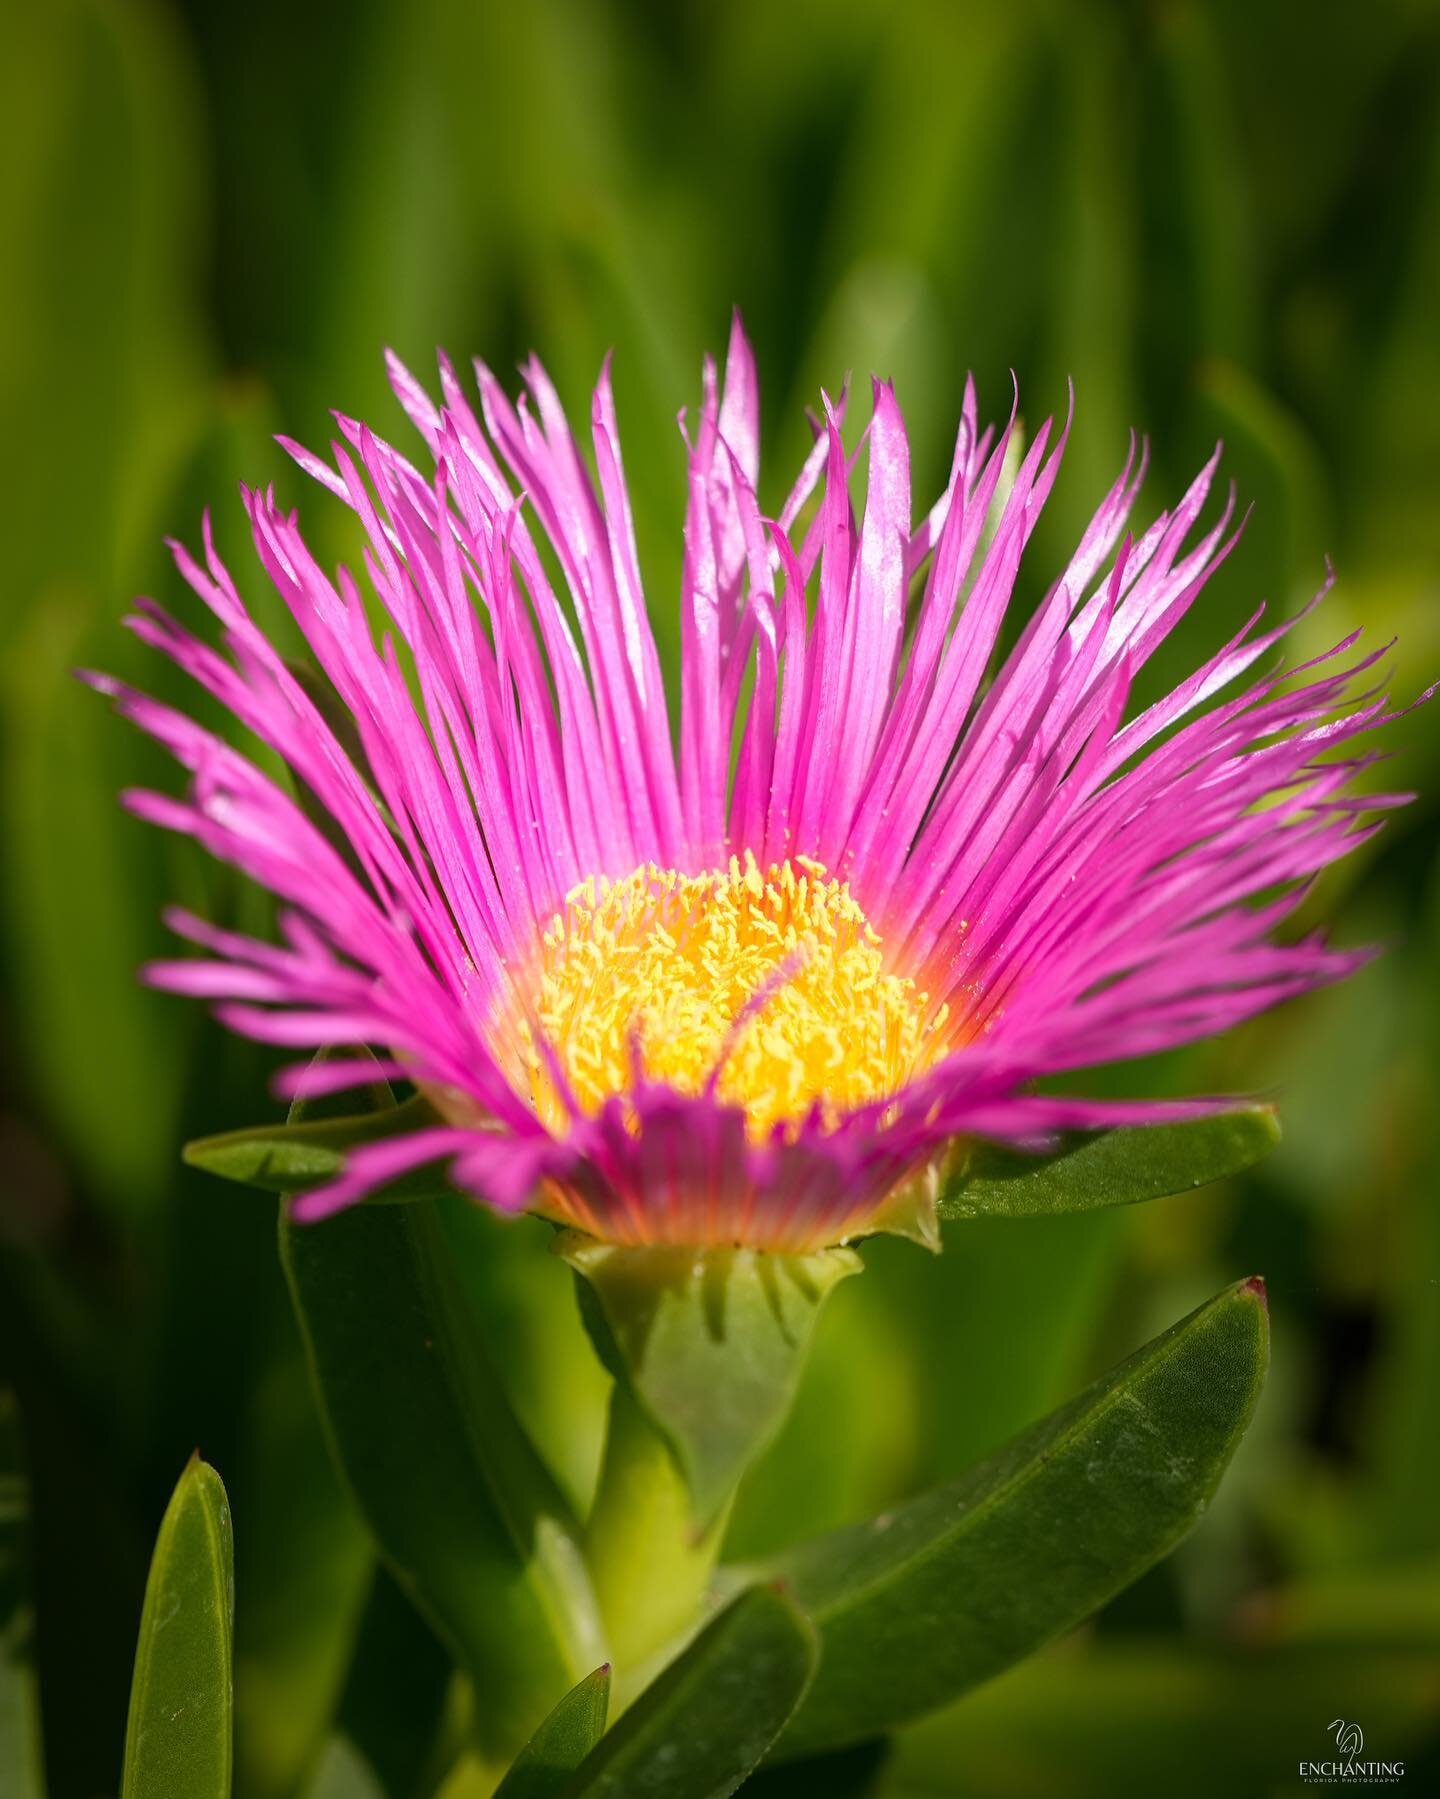 Day 21: May flowers #rebelsunitedmay2023potd 

Hottentot Fig, Carpobrotus edulis, also known as sour fig and Highway ice plant (a ground cover plant) &hellip; I took this photo on May 1st at the @staugalligatorfarm 

#hottentot #mayflowers 
#hey_ihad